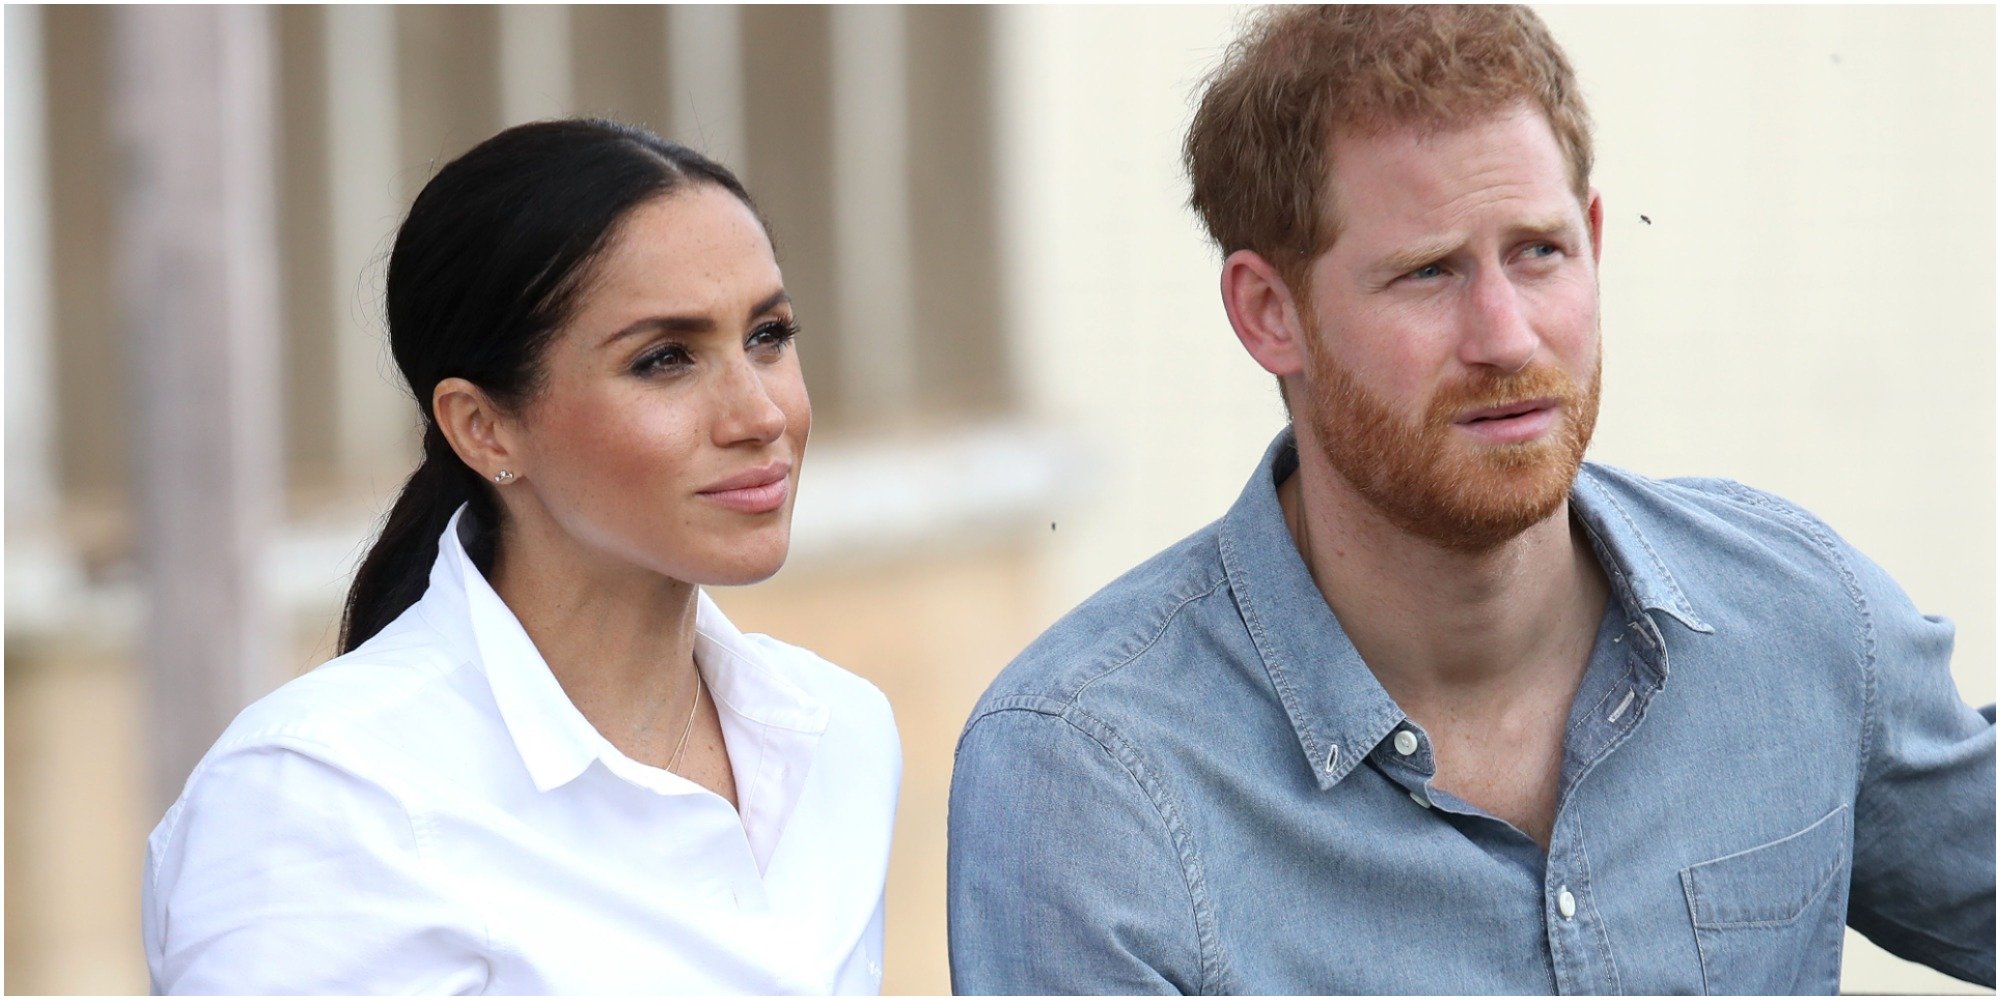 Meghan Markle and Prince Harry snapped by paparazzi.